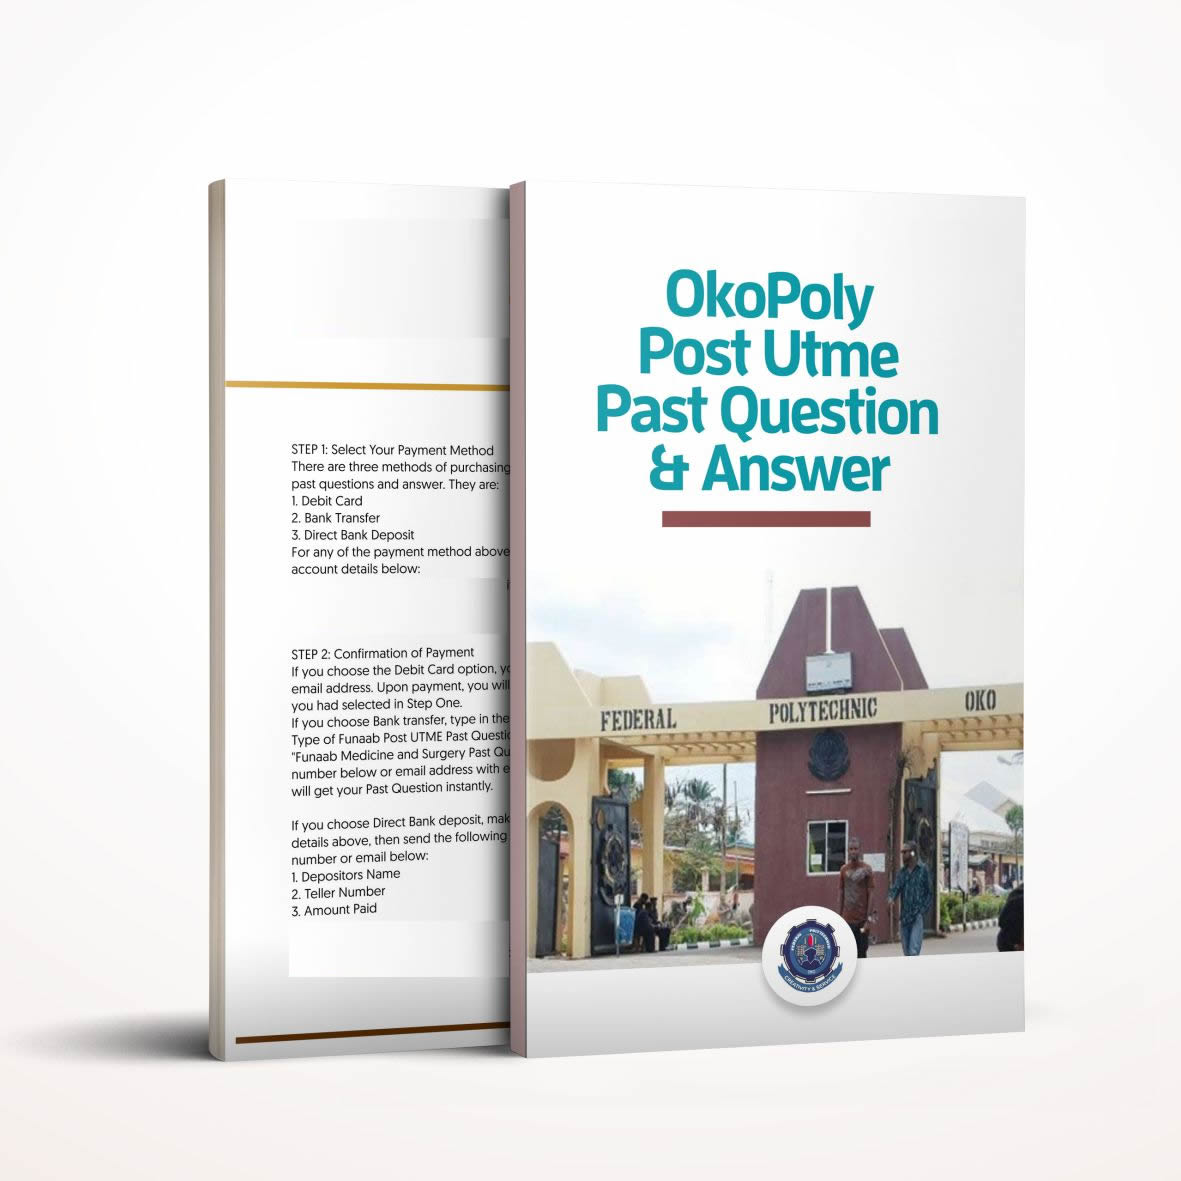 OKOPOLY Post UTME past questions and answers